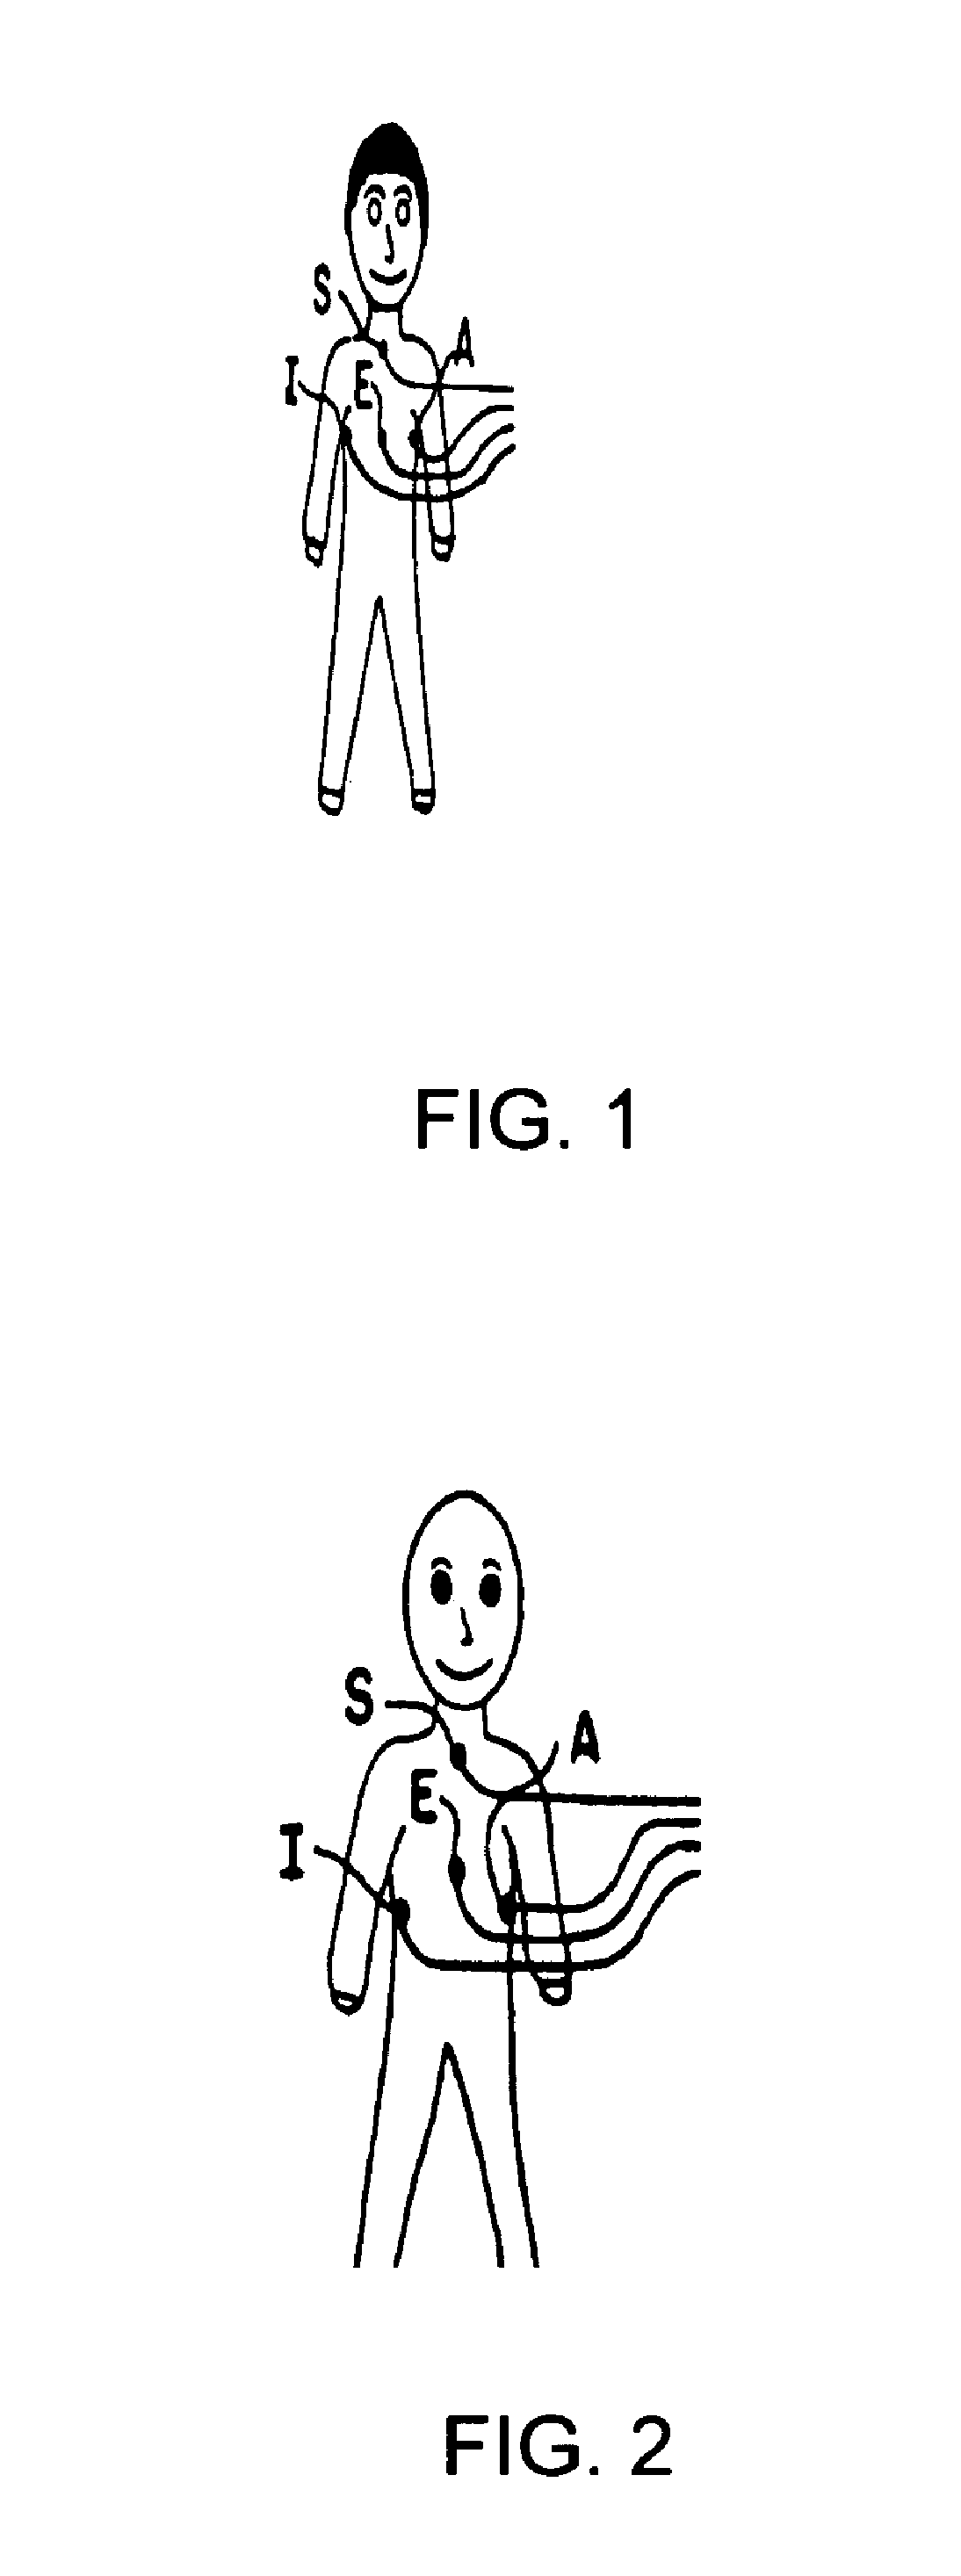 Wireless electrode arrangement and method for patient monitoring via electrocardiography